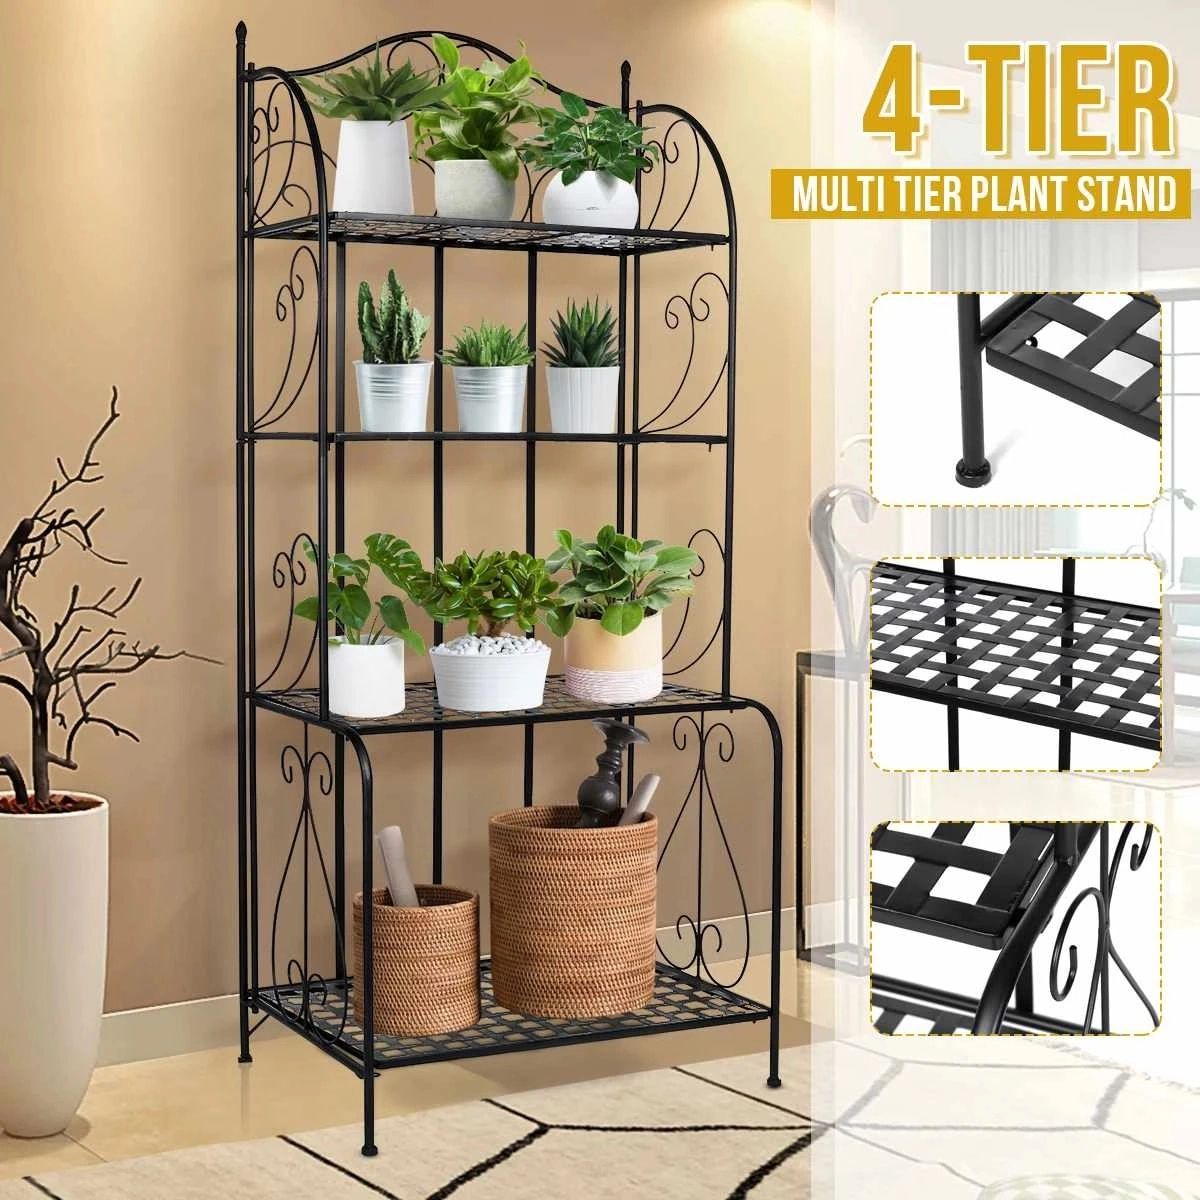 Big Size 4 Tier Metal Plant Stand Flower Pot Rack Outdoor Display Shelf  Holder Home Decor Indoor Balcony Flower Pot Storage Rack|Plant Shelves| –  Aliexpress For Four Tier Metal Plant Stands (View 9 of 15)